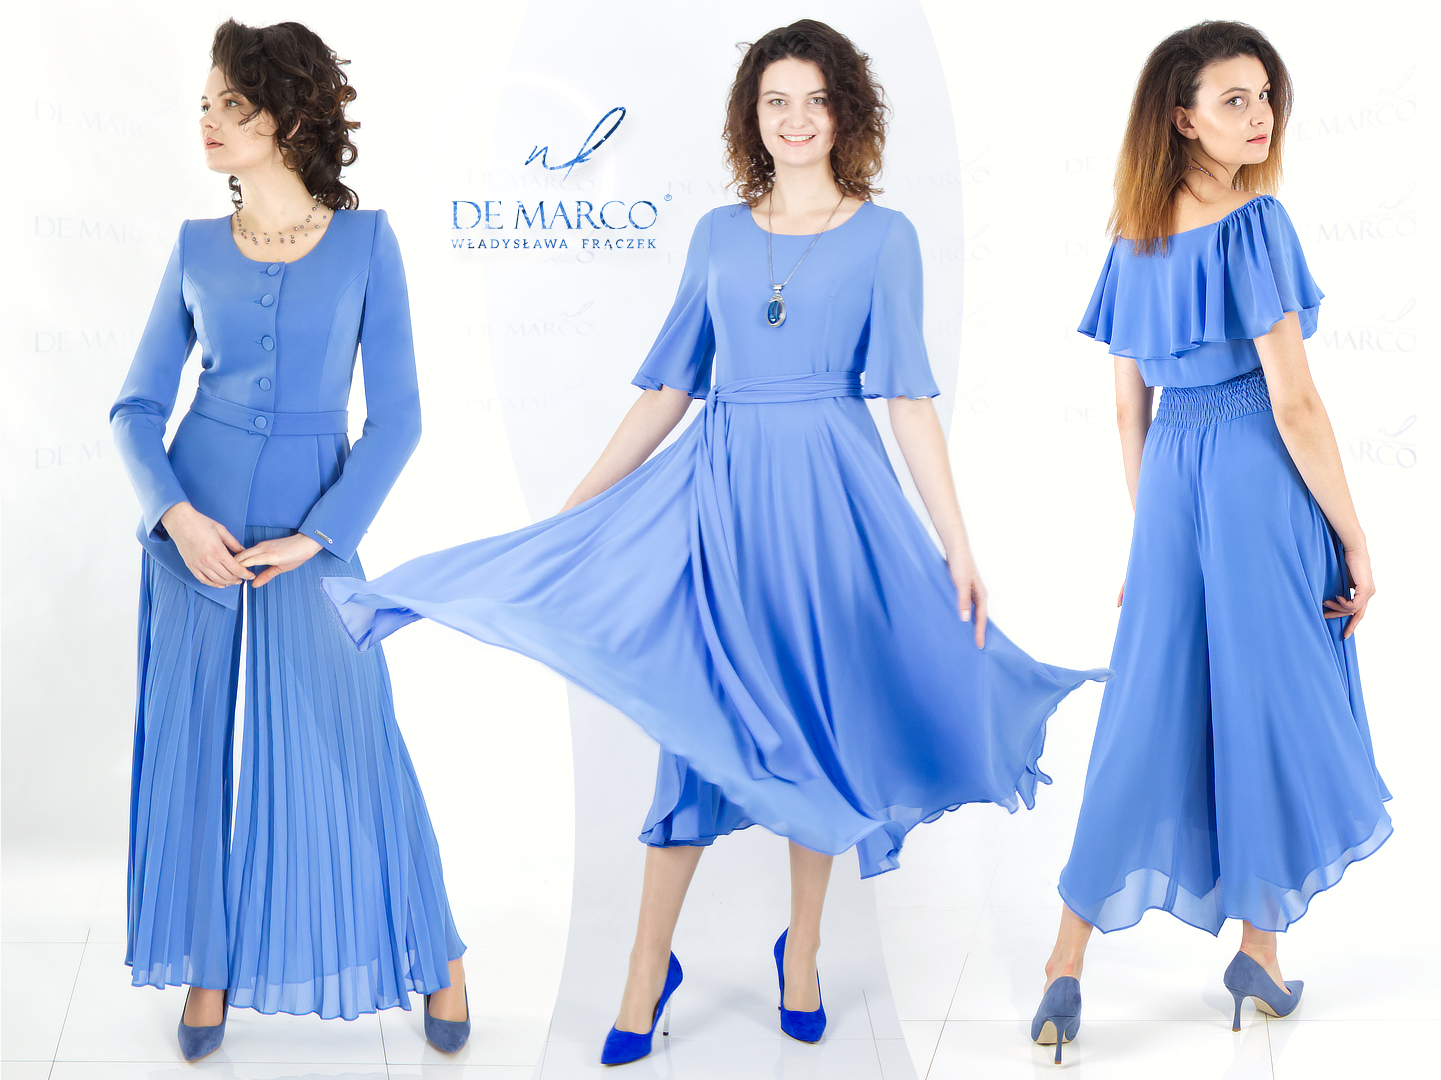 A fashionable colour! Exclusive styling in Egyptian blue